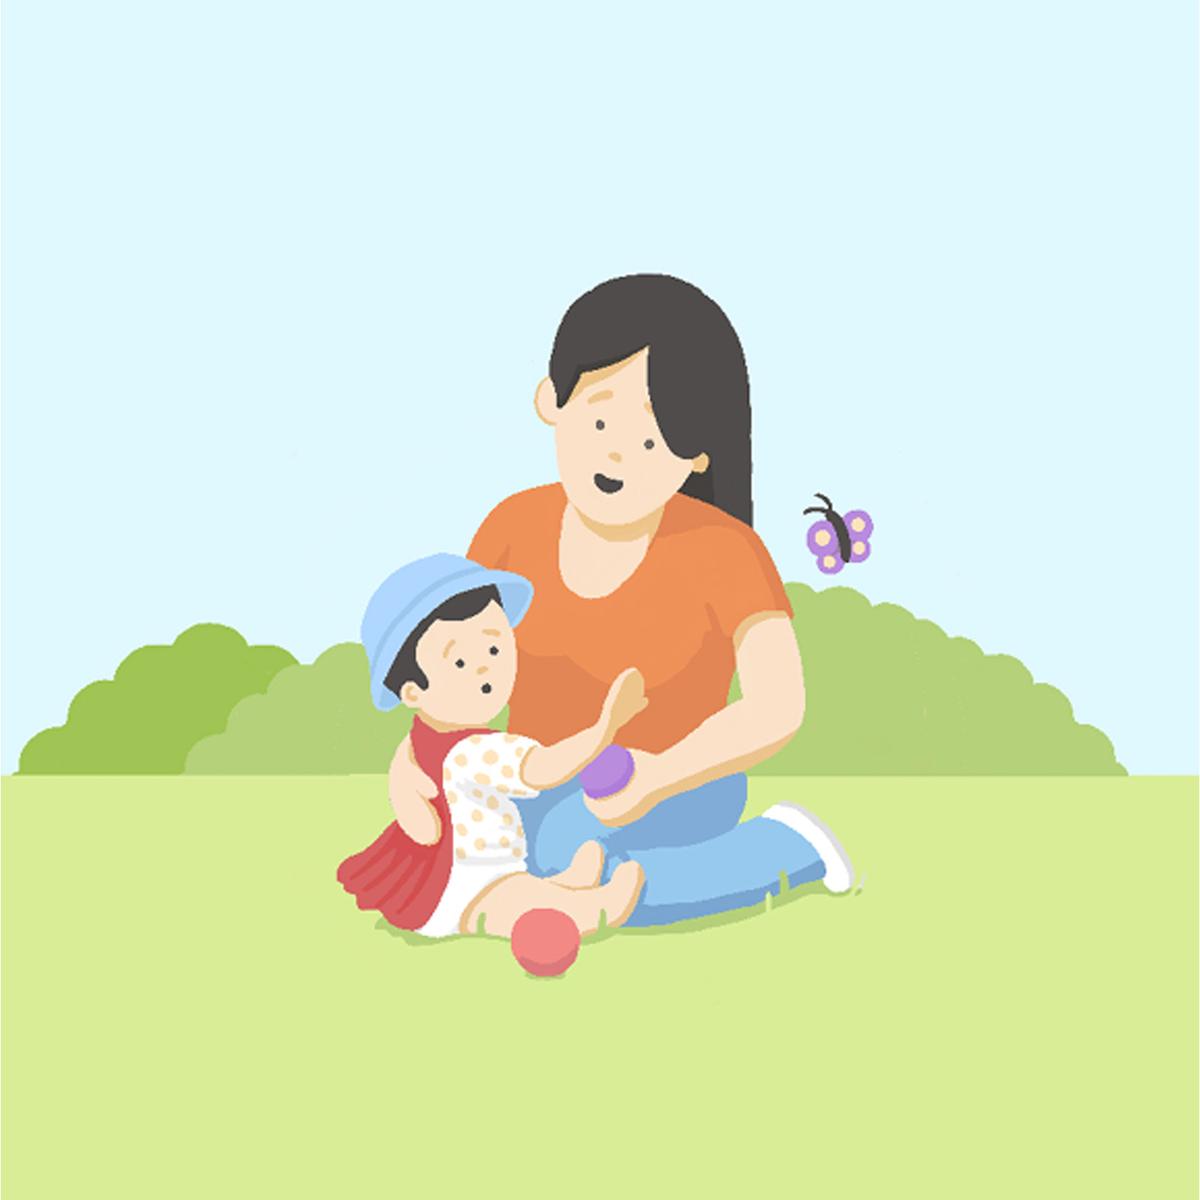 Illustration of a woman sitting on grass with a baby